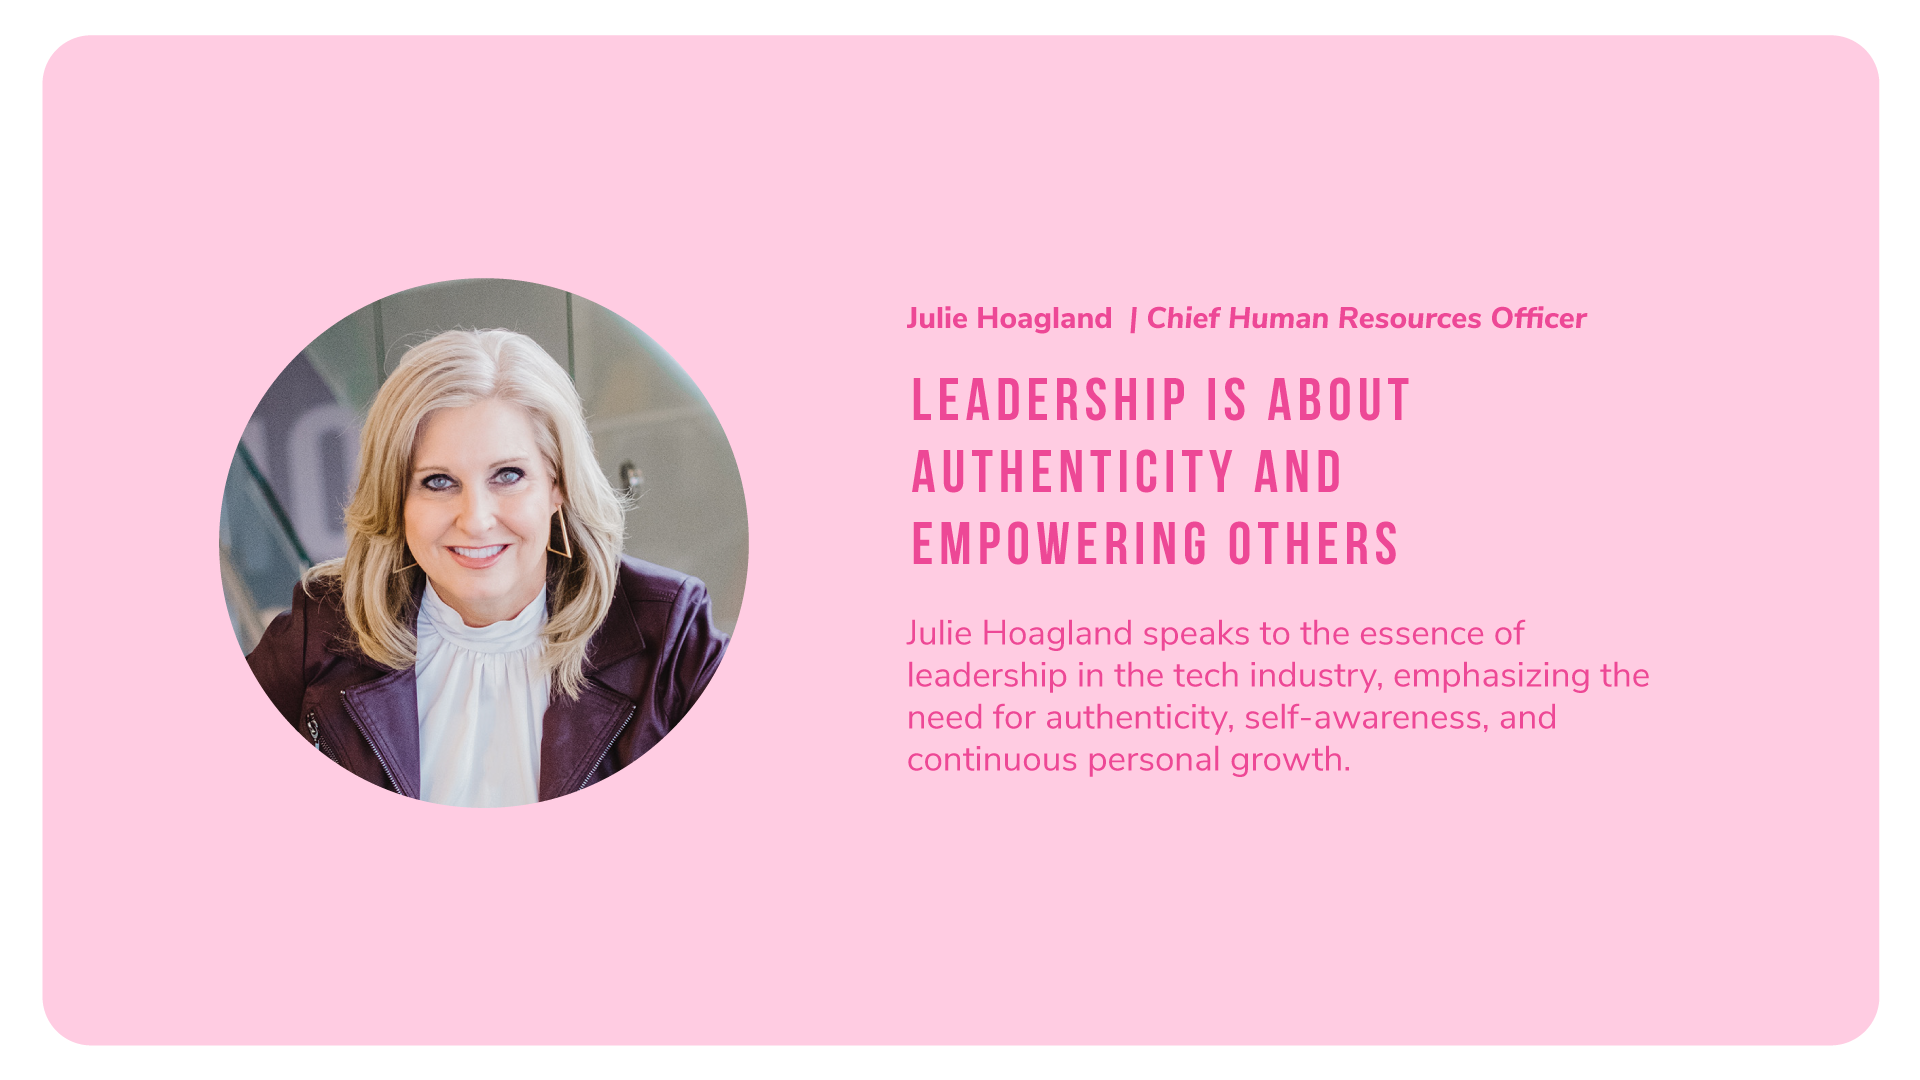 Julie Hoagland of Alkami says: Leadership is about authenticity and empowering others